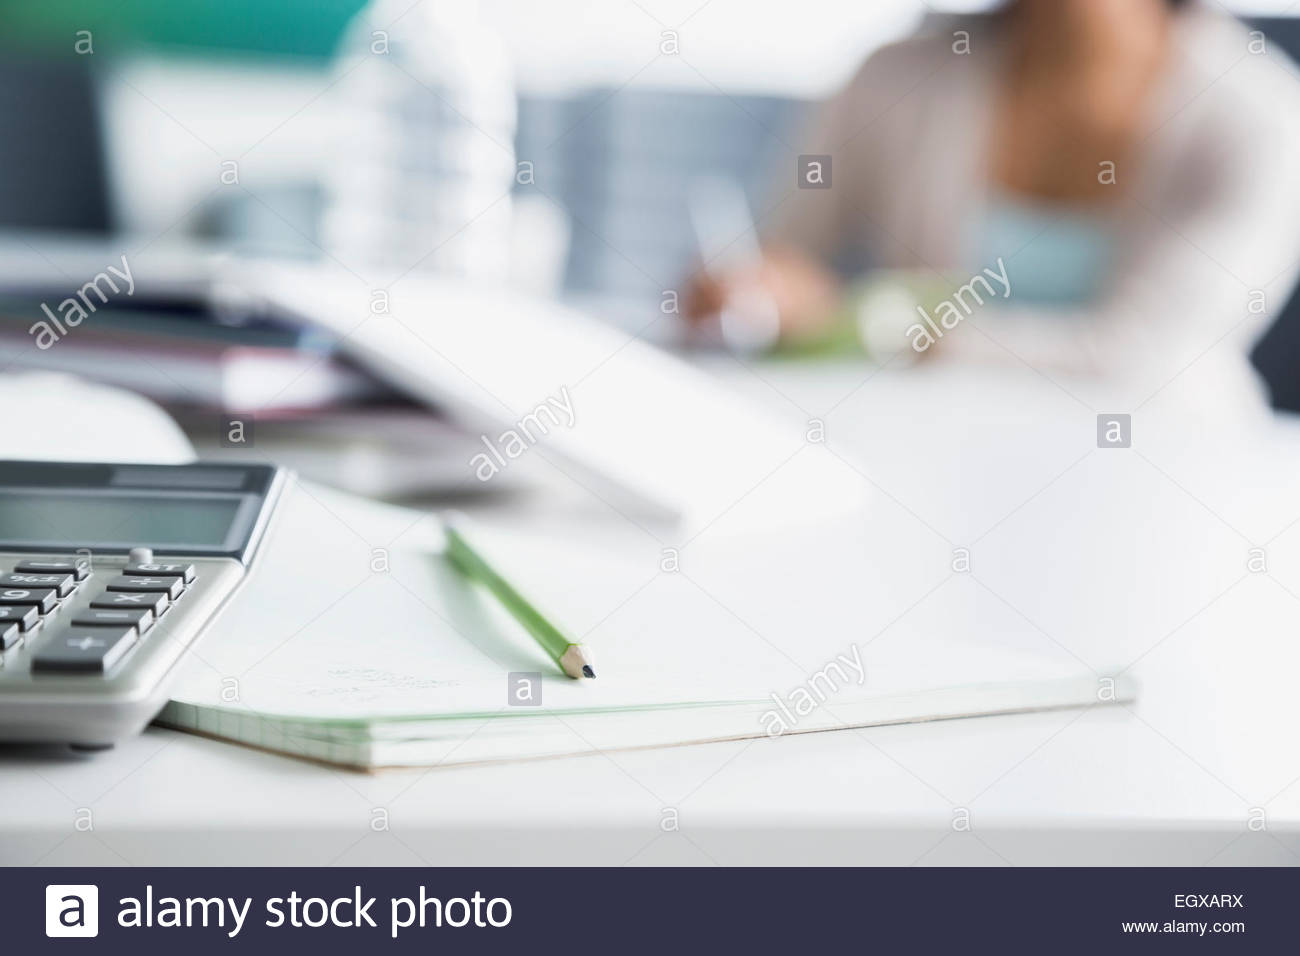 Pencil on notepad next to calculator Stock Photo